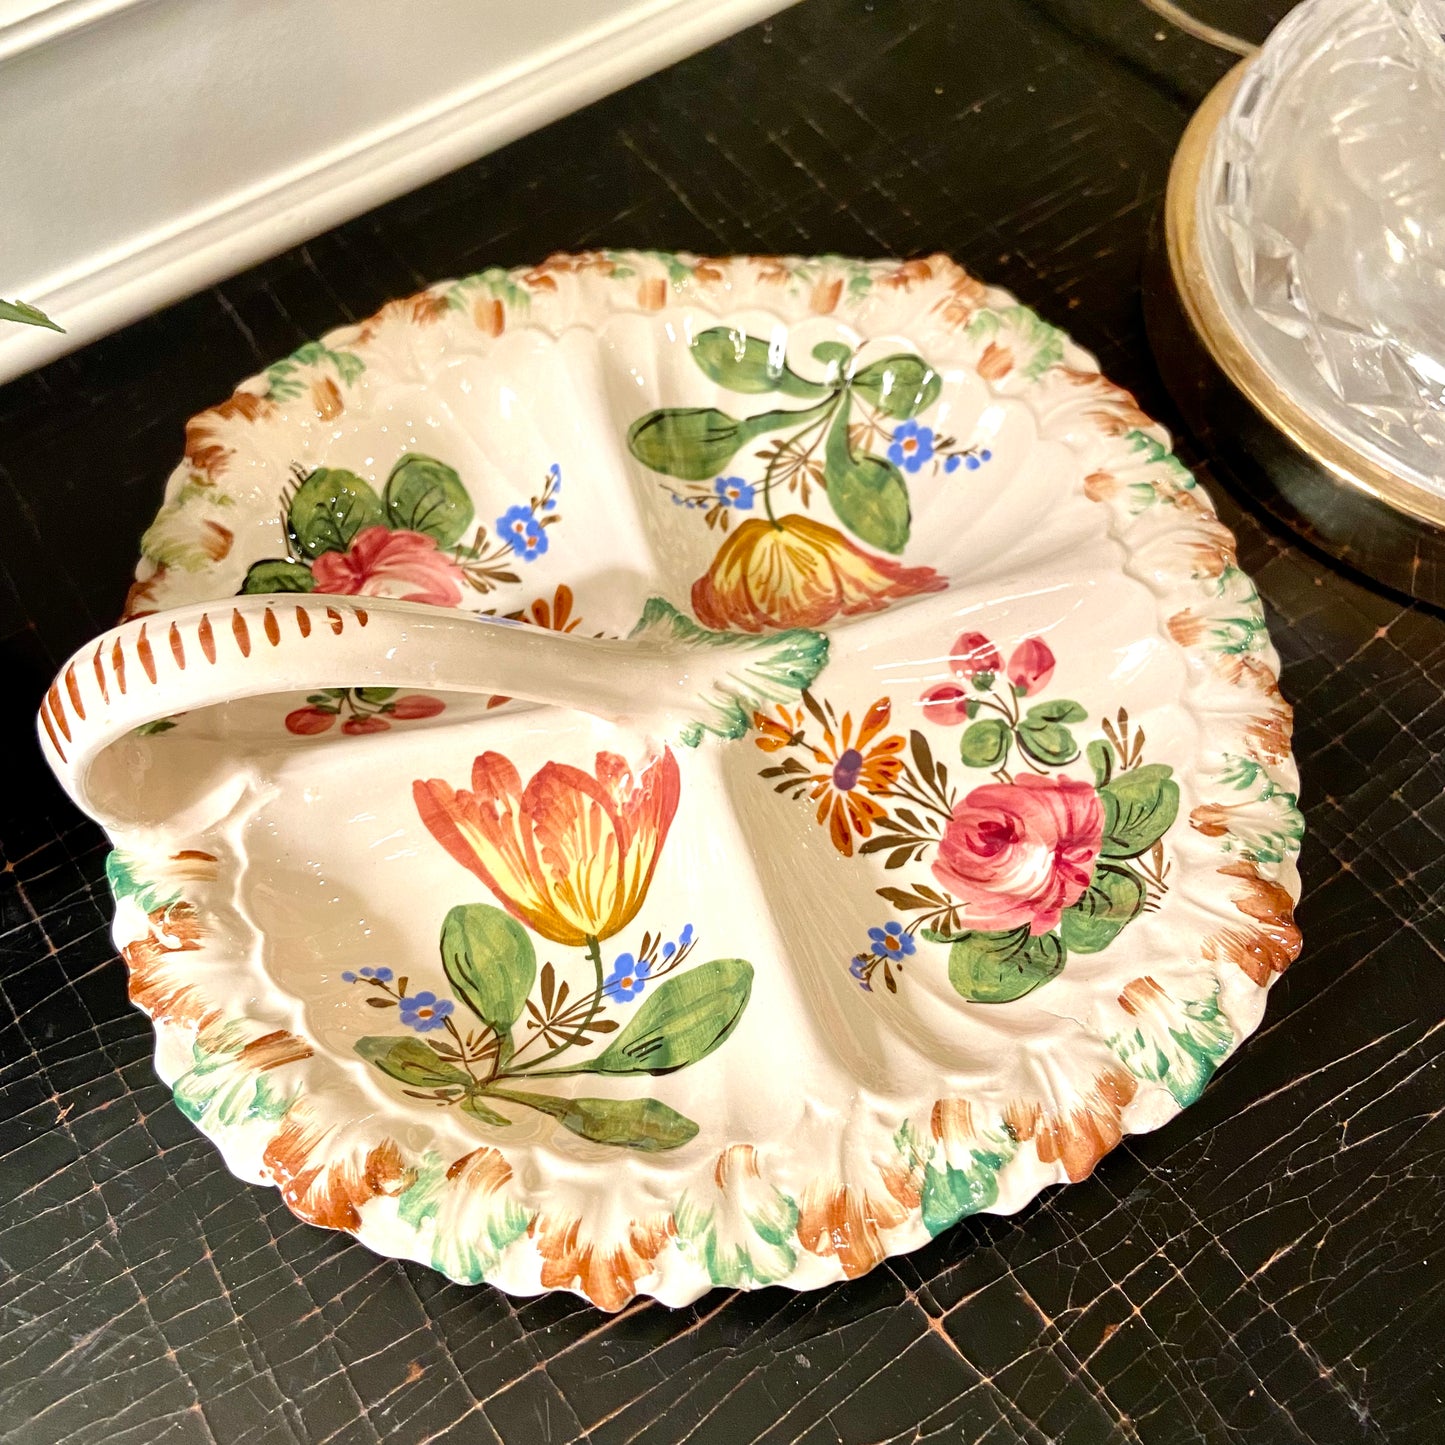 Delightful 4 section hand painted Italian platter with handle